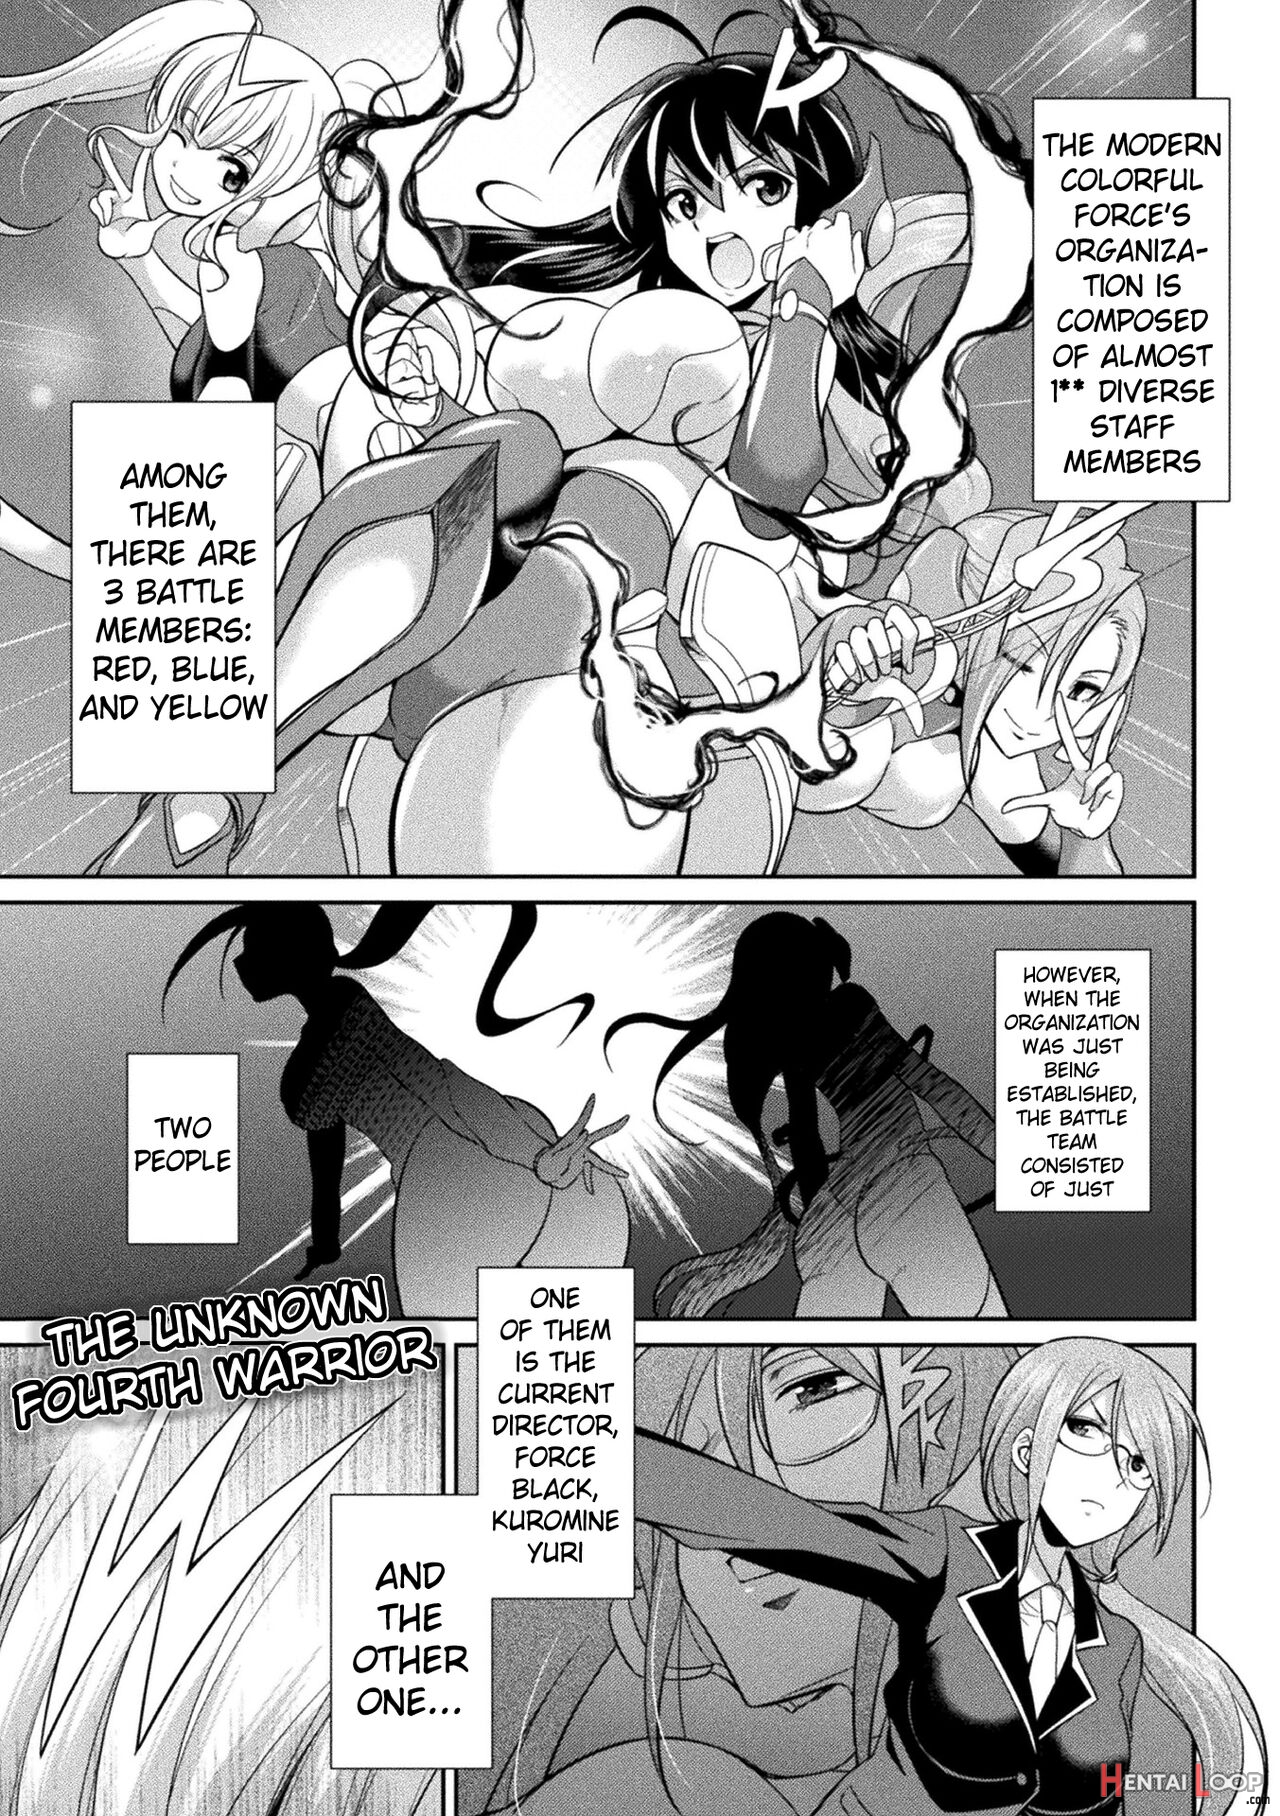 Special Duty Squadron Colorful Force Heroines Of Justice Vs The Tentacle Queen! The Great Battle Of Futa Training!? page 87